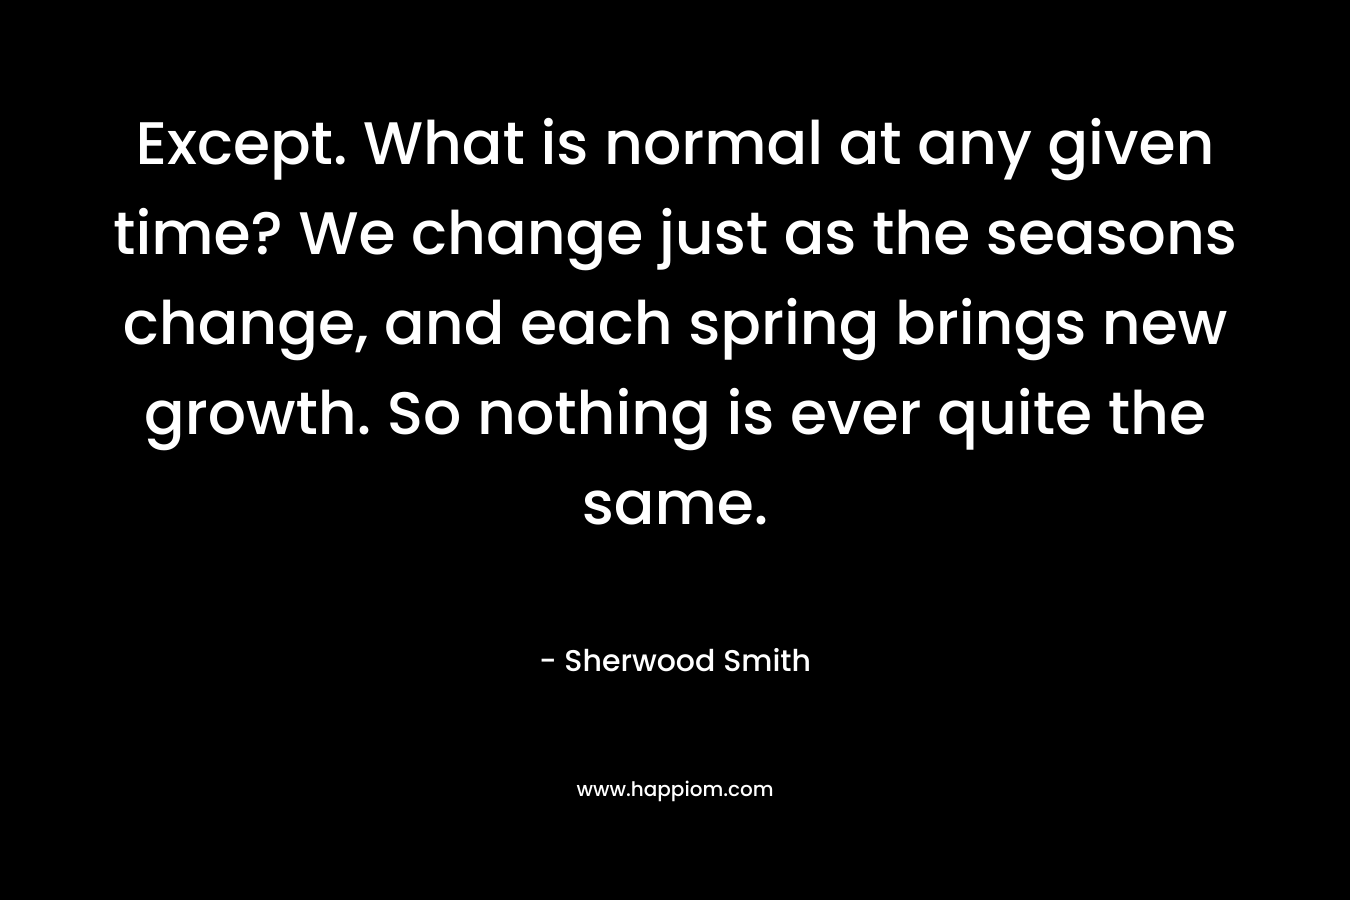 Except. What is normal at any given time? We change just as the seasons change, and each spring brings new growth. So nothing is ever quite the same. – Sherwood Smith